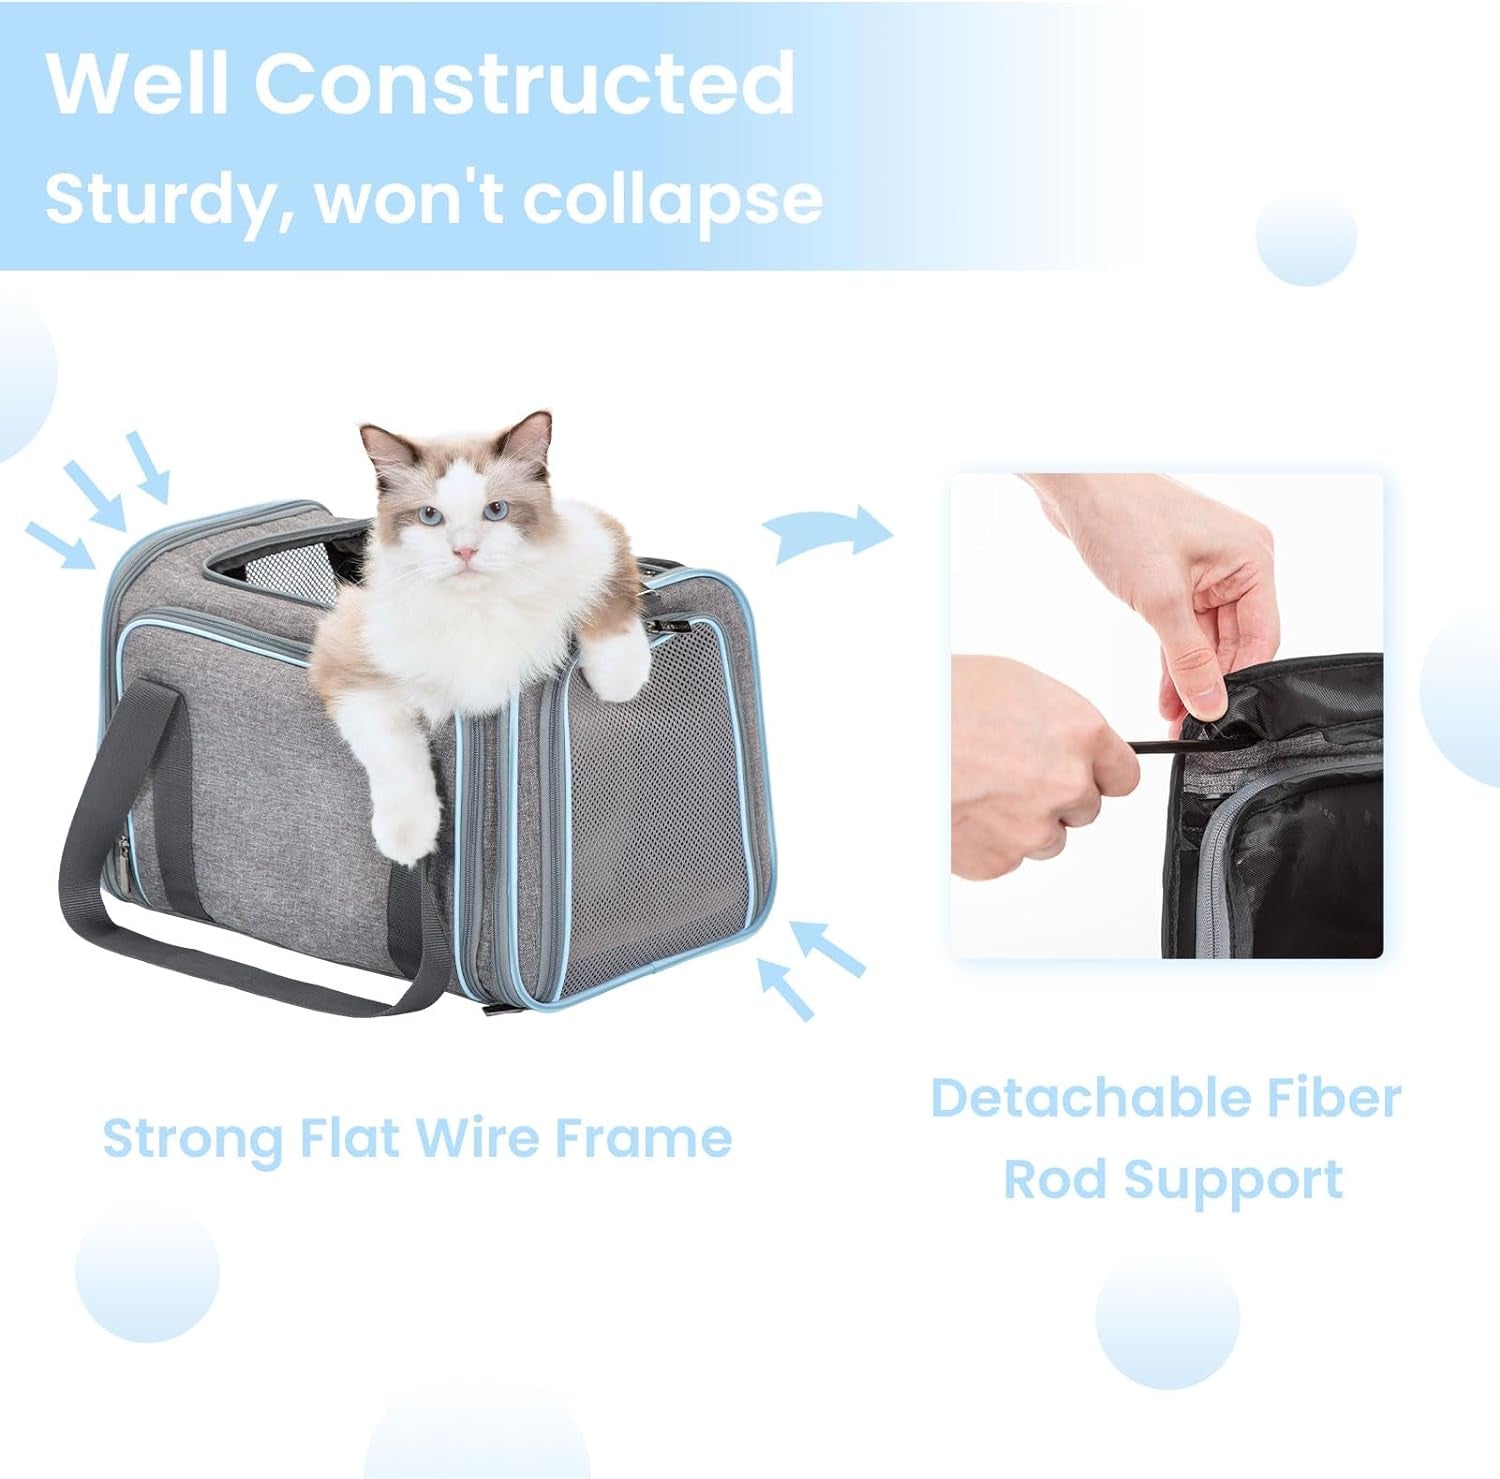 Compact & Expandable Soft-Sided Pet Carrier - Ideal for Small Pets